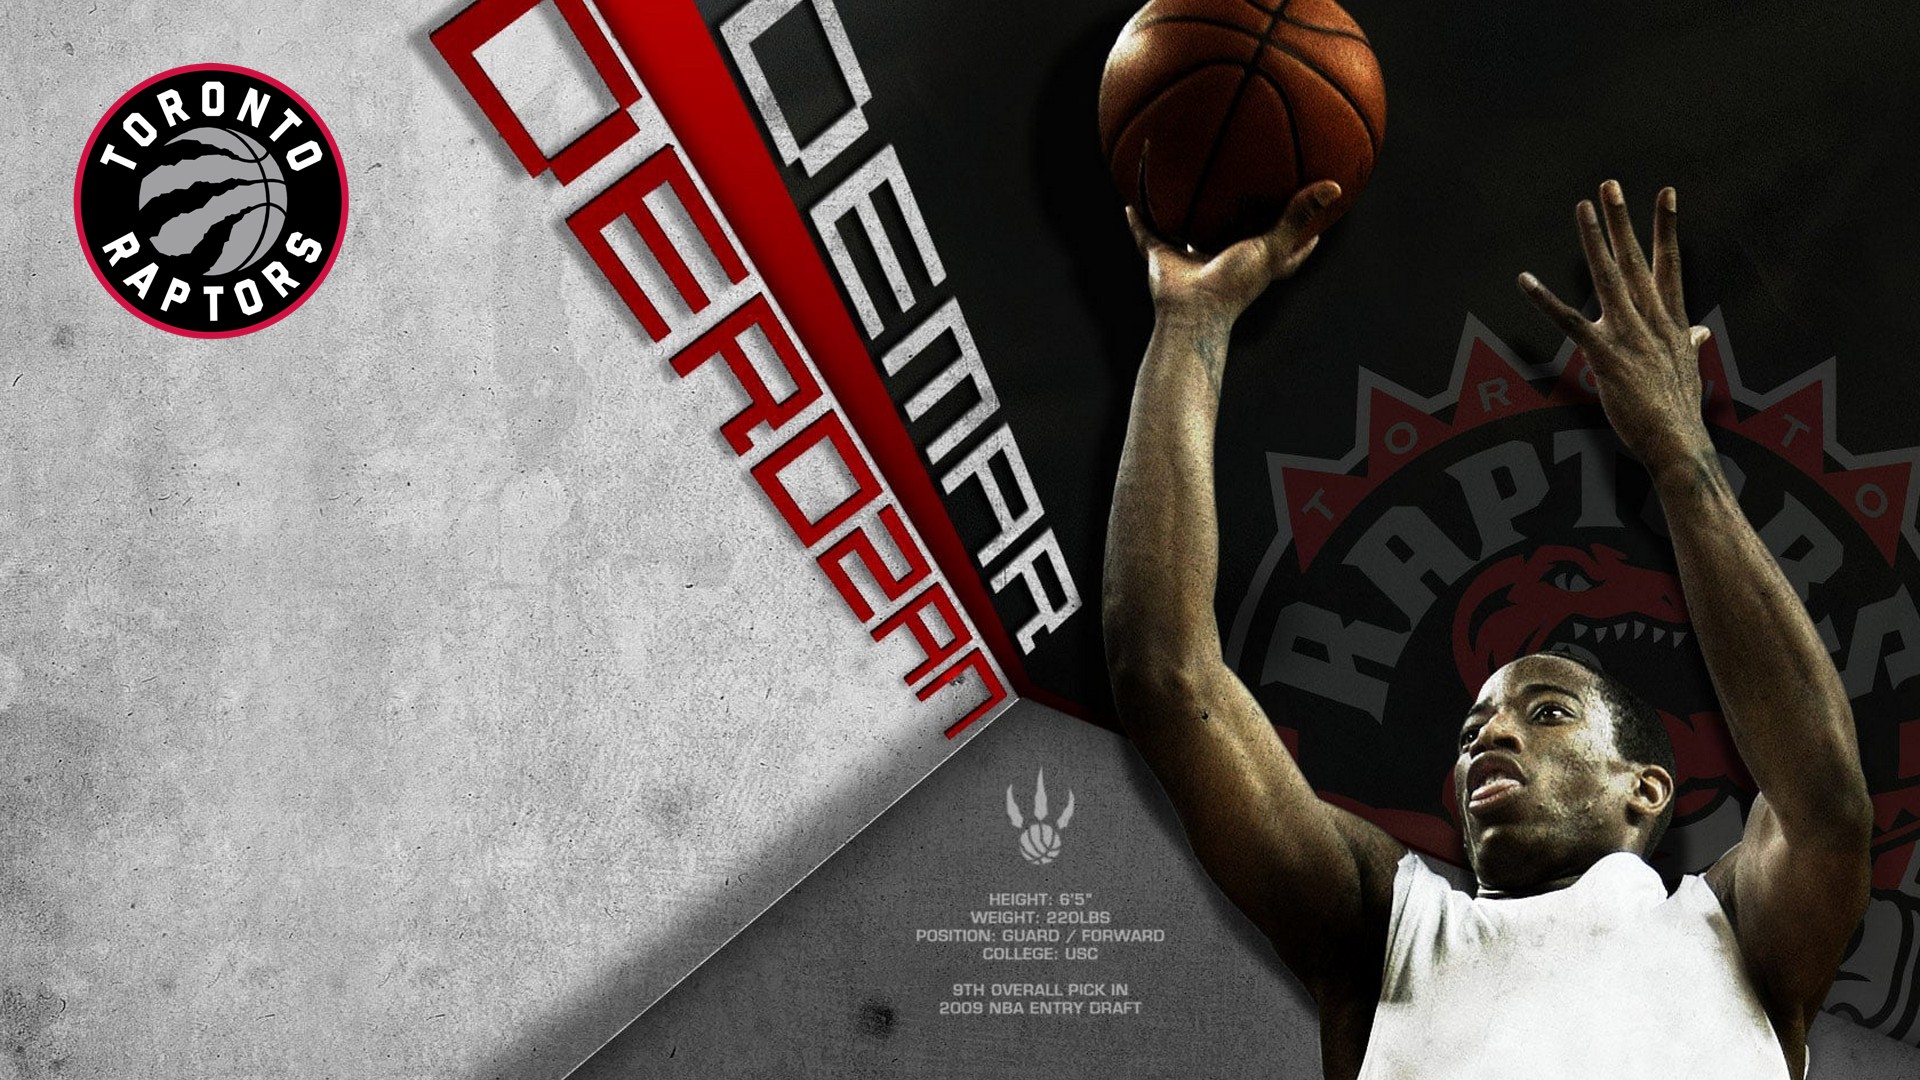 DeMar DeRozan Wallpaper with image dimensions 1920x1080 pixel. You can make this wallpaper for your Desktop Computer Backgrounds, Windows or Mac Screensavers, iPhone Lock screen, Tablet or Android and another Mobile Phone device